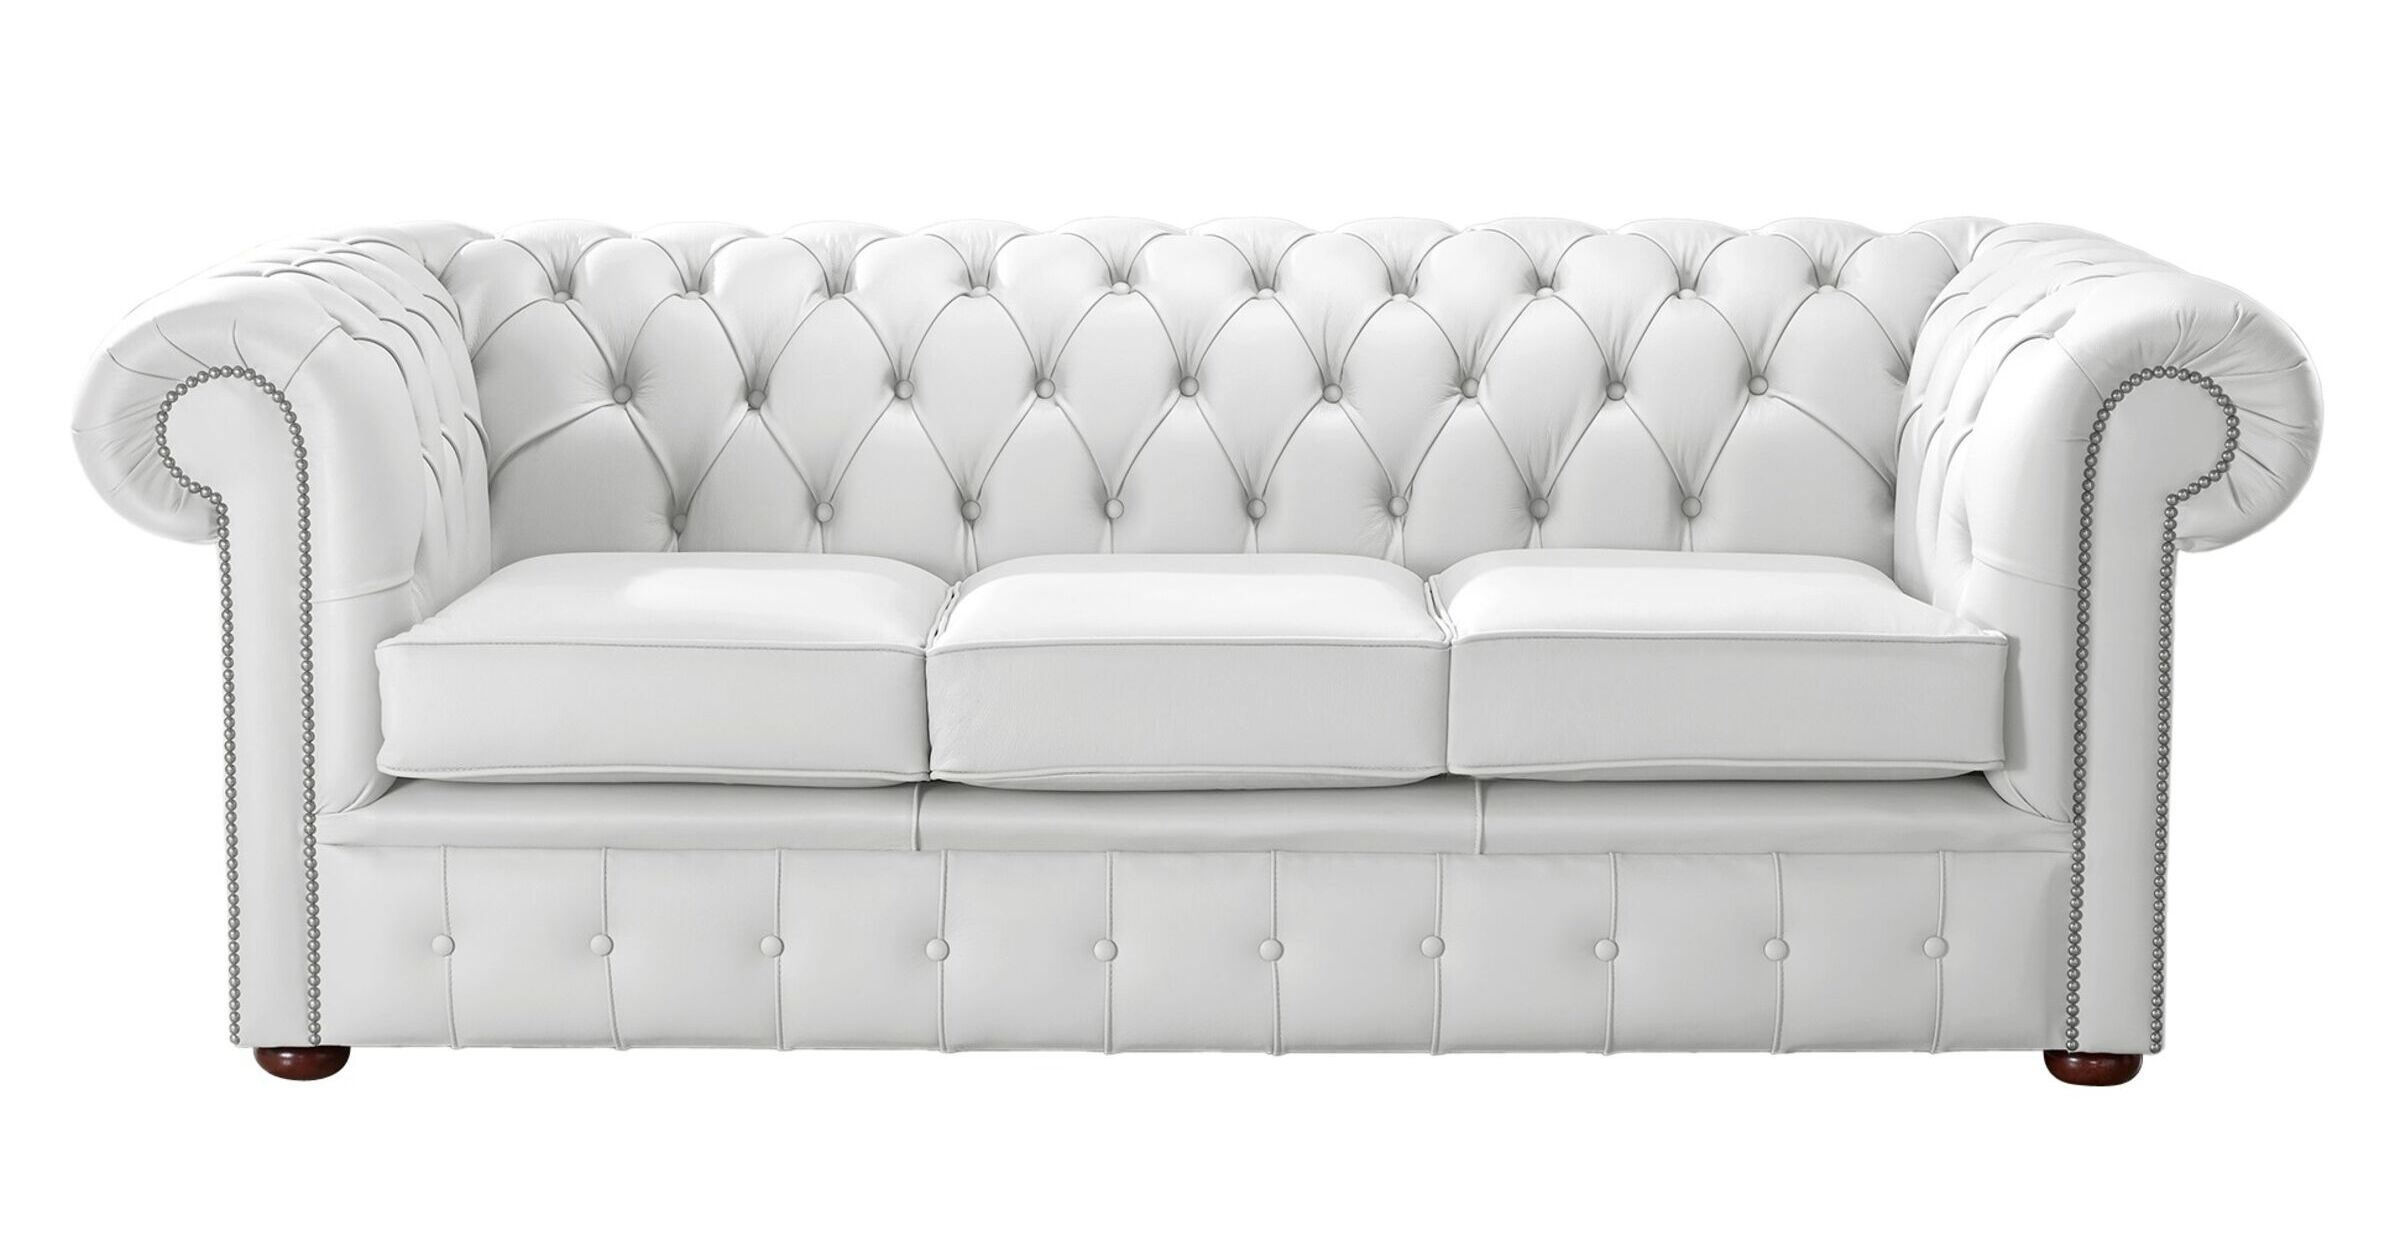 white leather chesterfield sofa uk